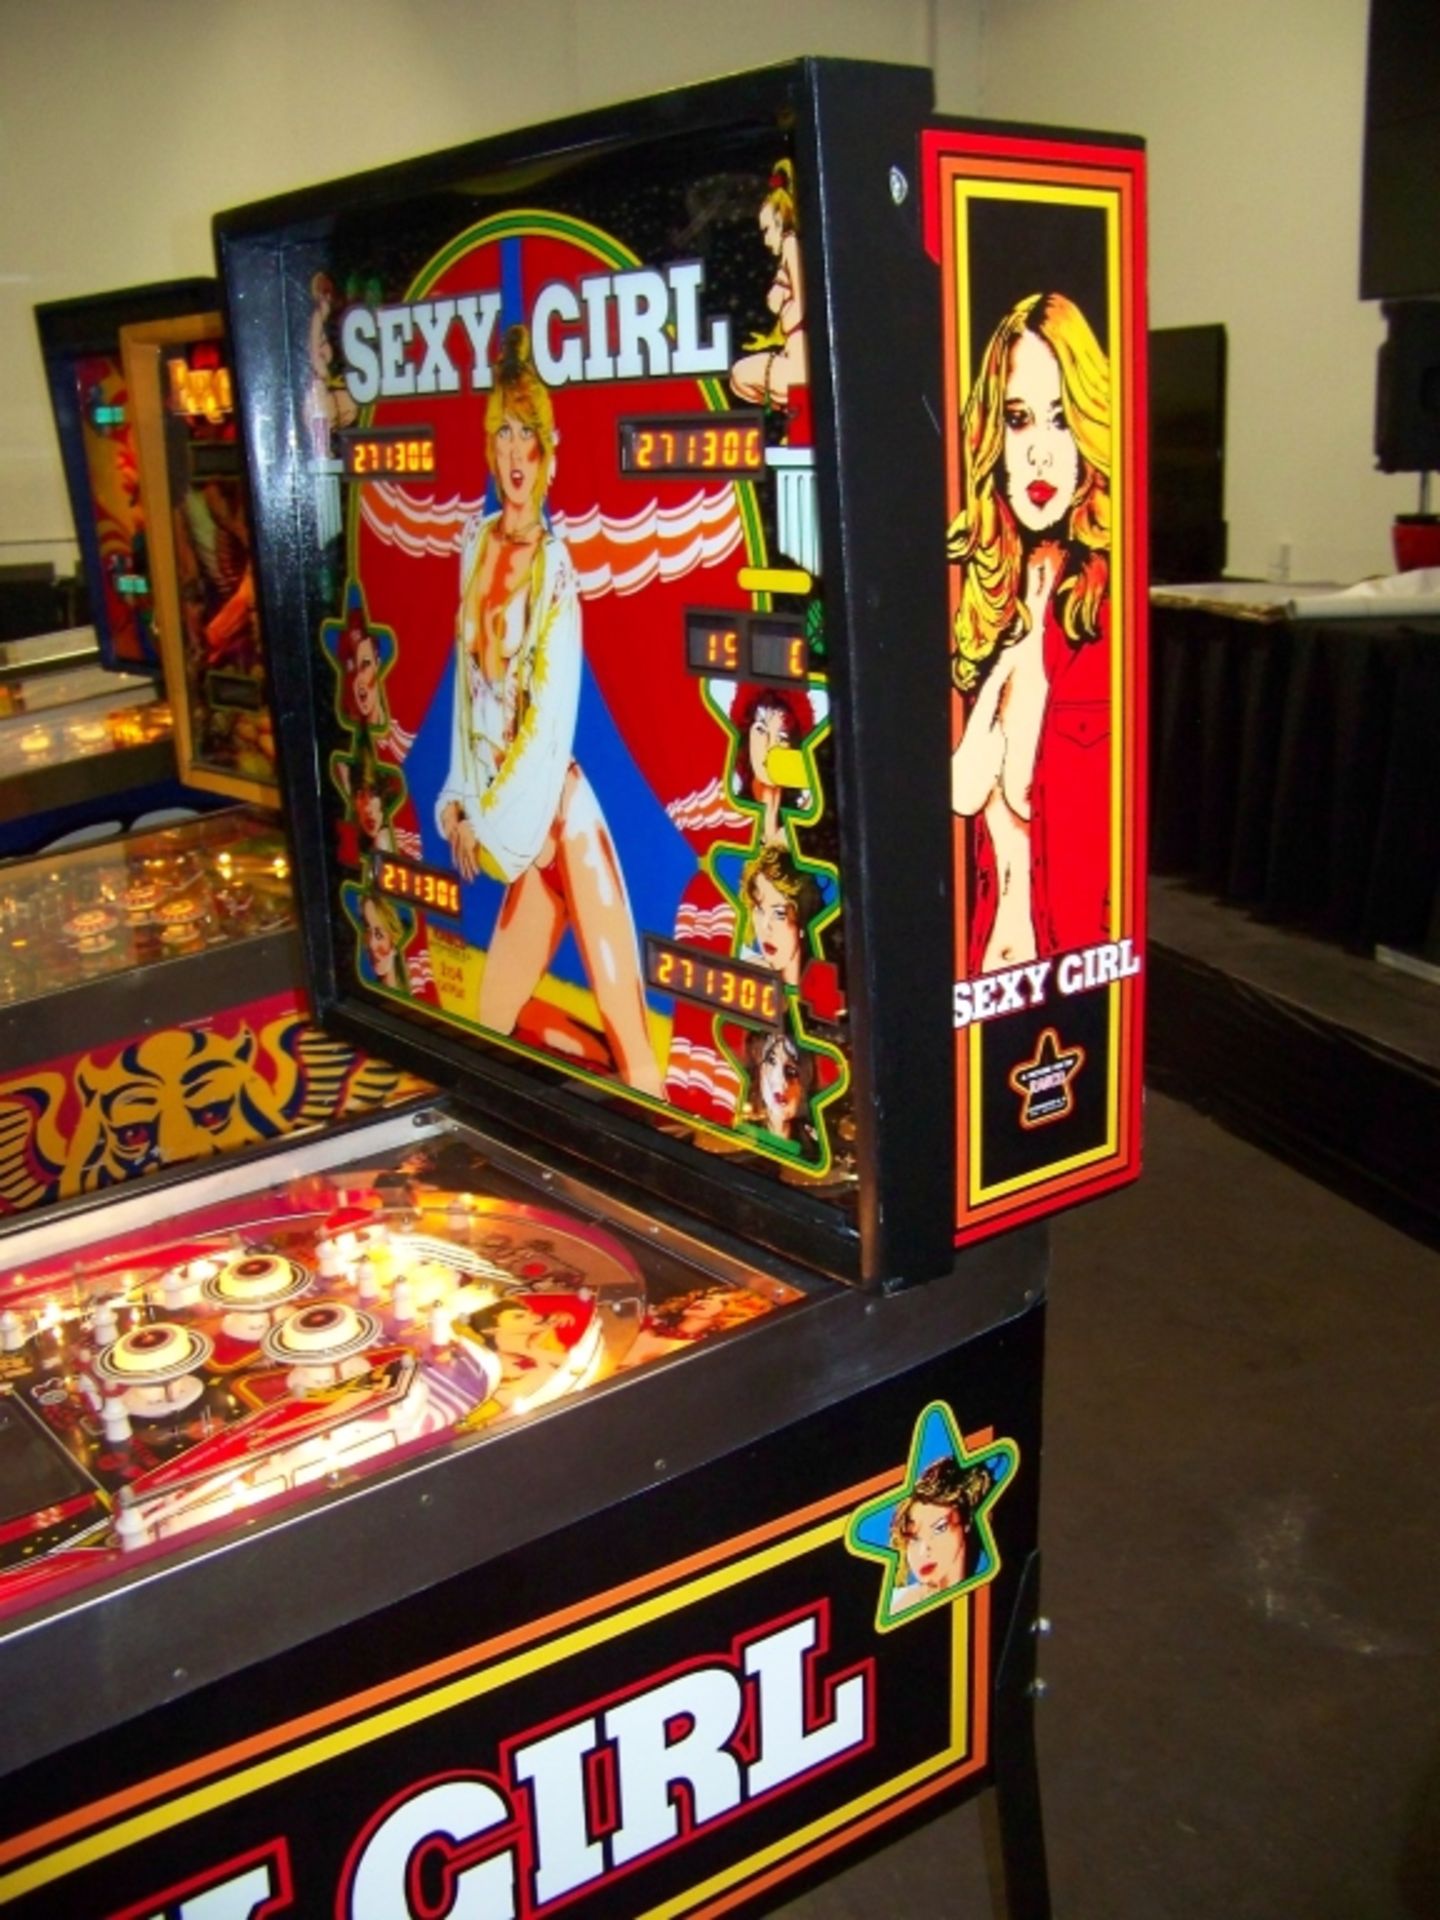 SEXY GIRL PINBALL MACHINE 1980 RANCO AUTOMATEN Item is in used condition. Evidence of wear and - Image 8 of 10